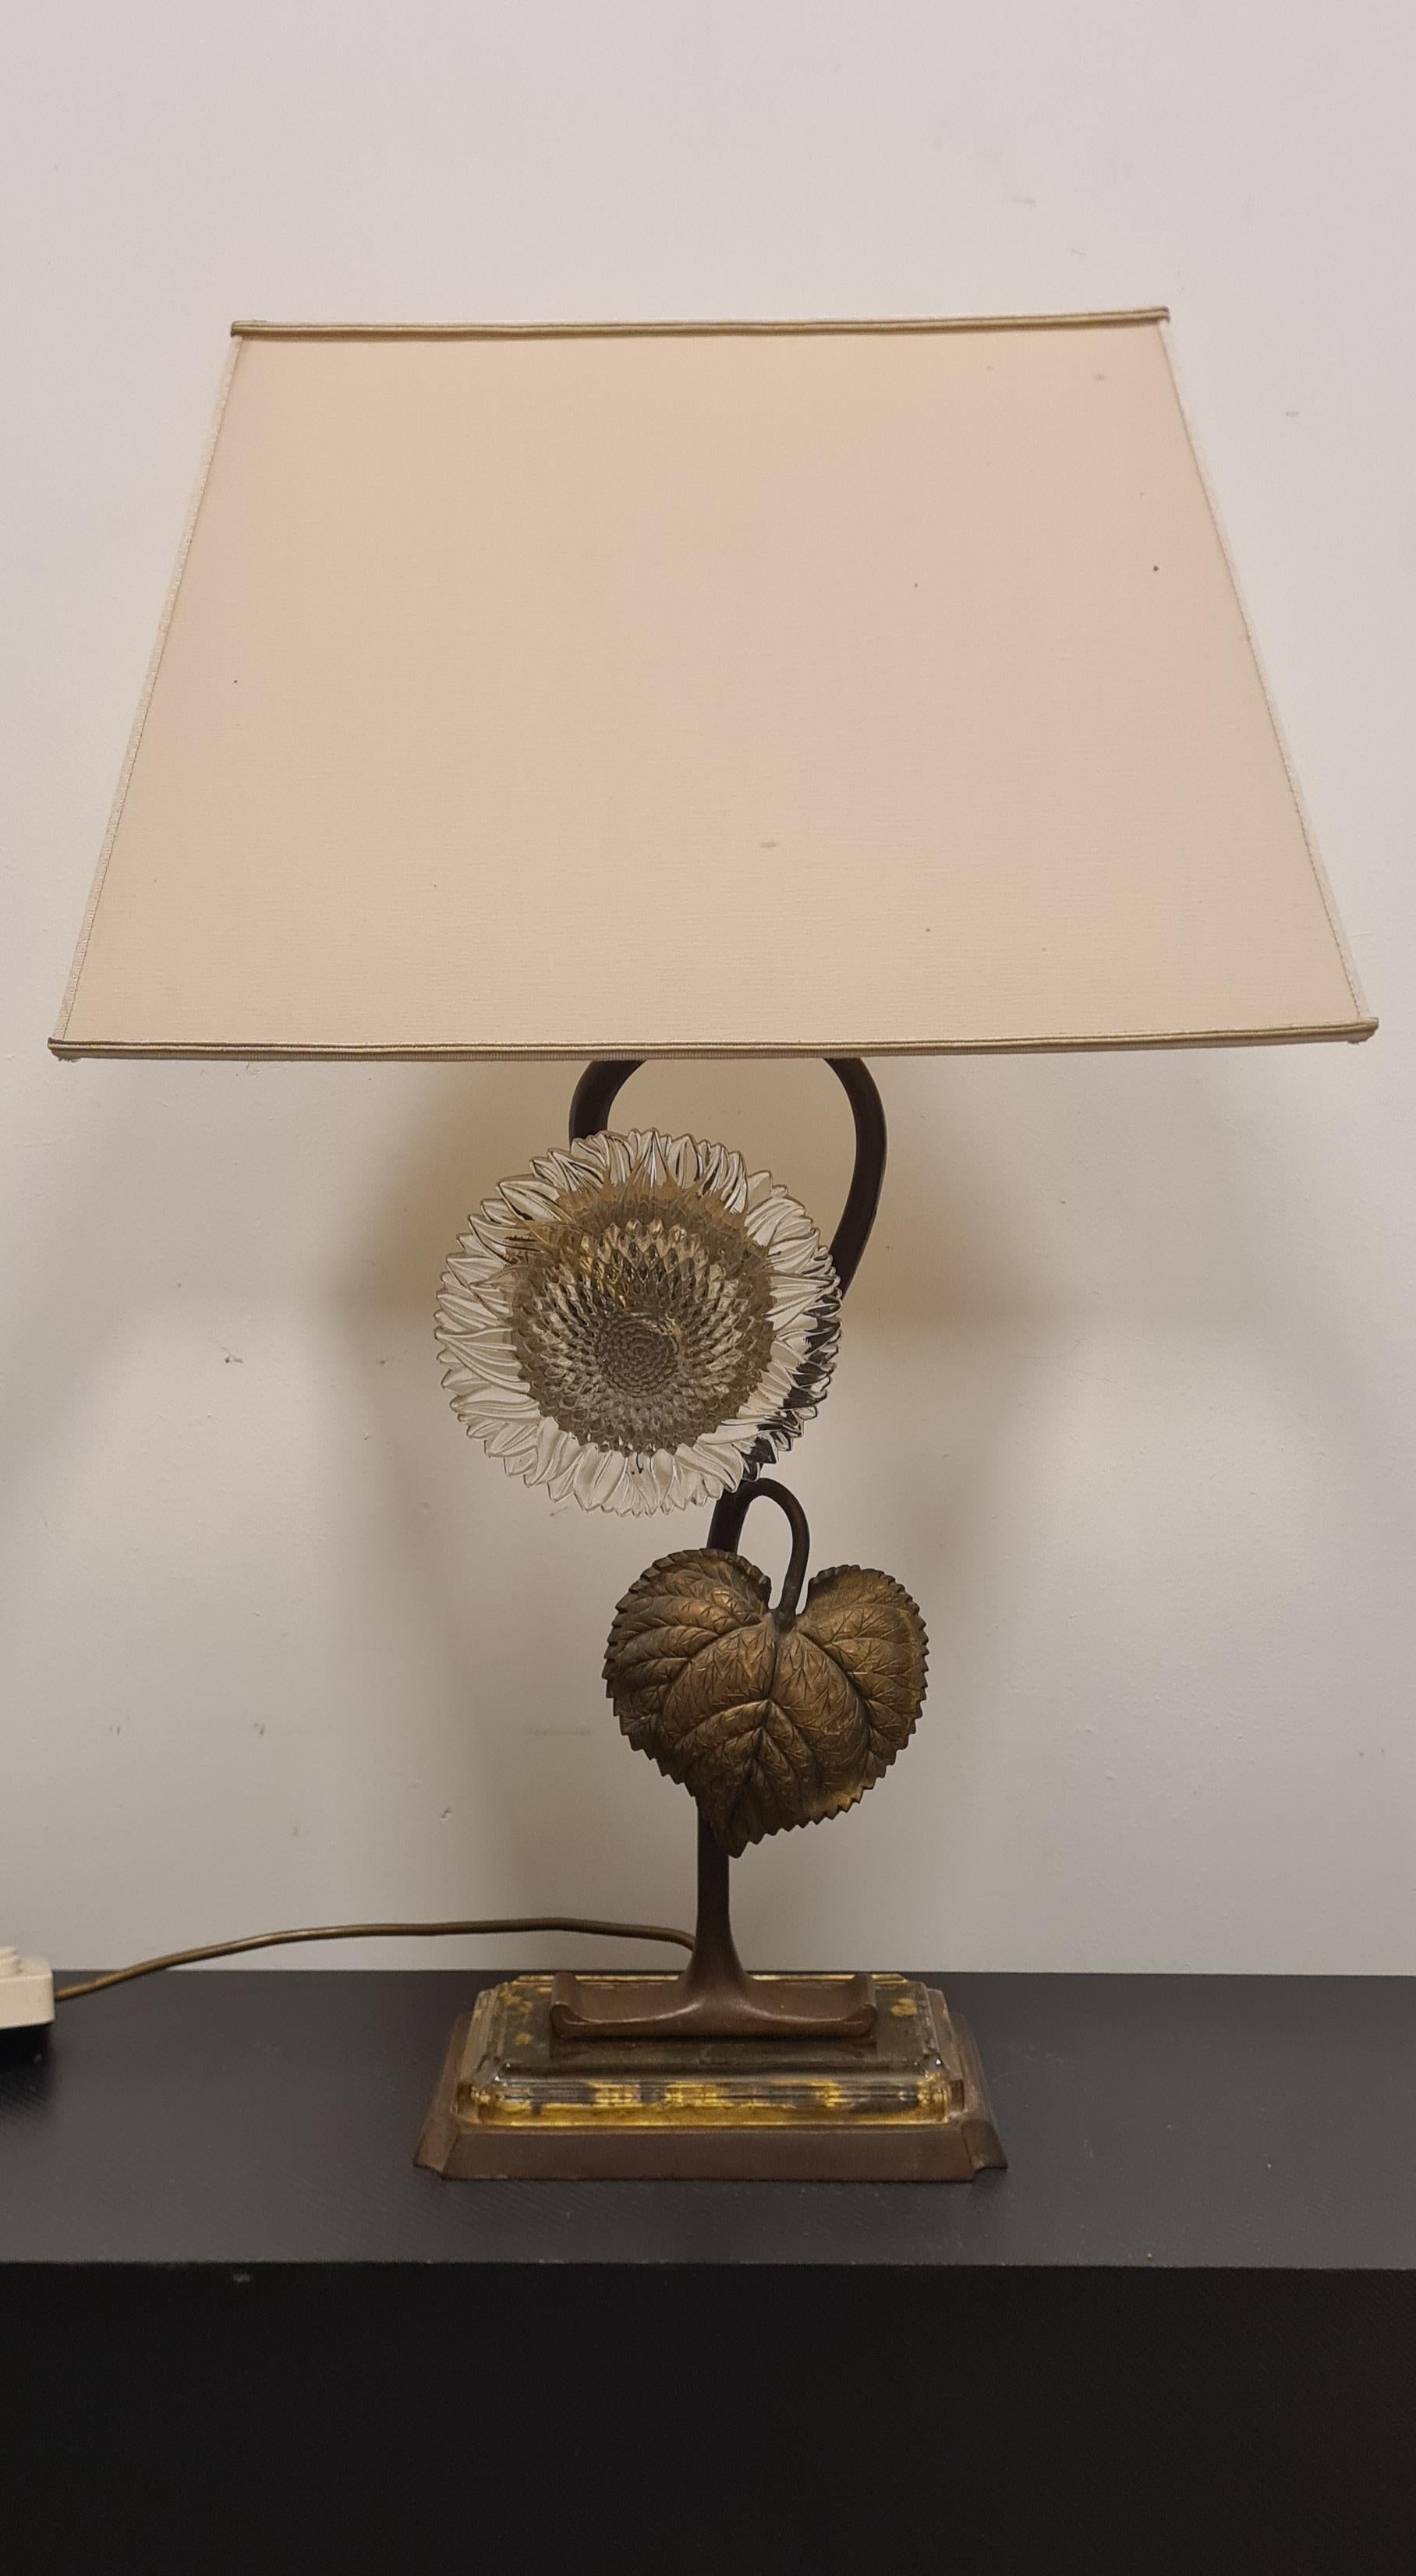 Refined bronze and glass sunflower table lamp.

This elegant lamp features a bronze and glass base from which a bronze sunflower stem grows.

The corolla of the sunflower is given by a worked glass disc.

The lamp has several lighting modes, either